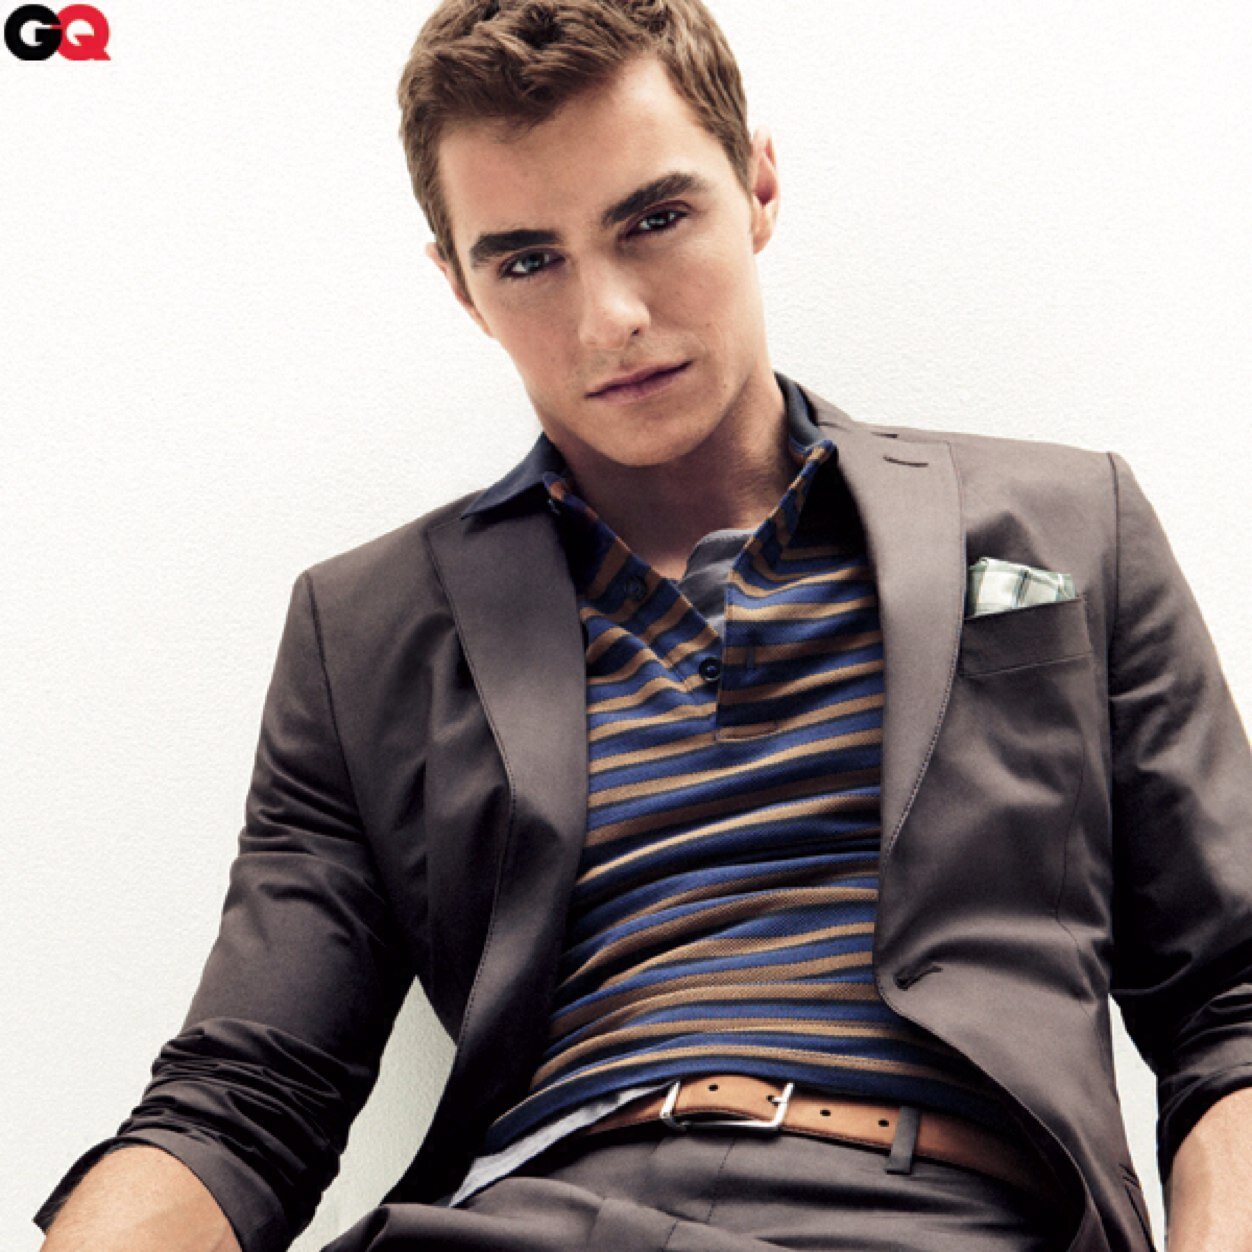 Dave franco is the definition of perfection❤️❤️❤️❤️❤️❤️❤️❤️❤️